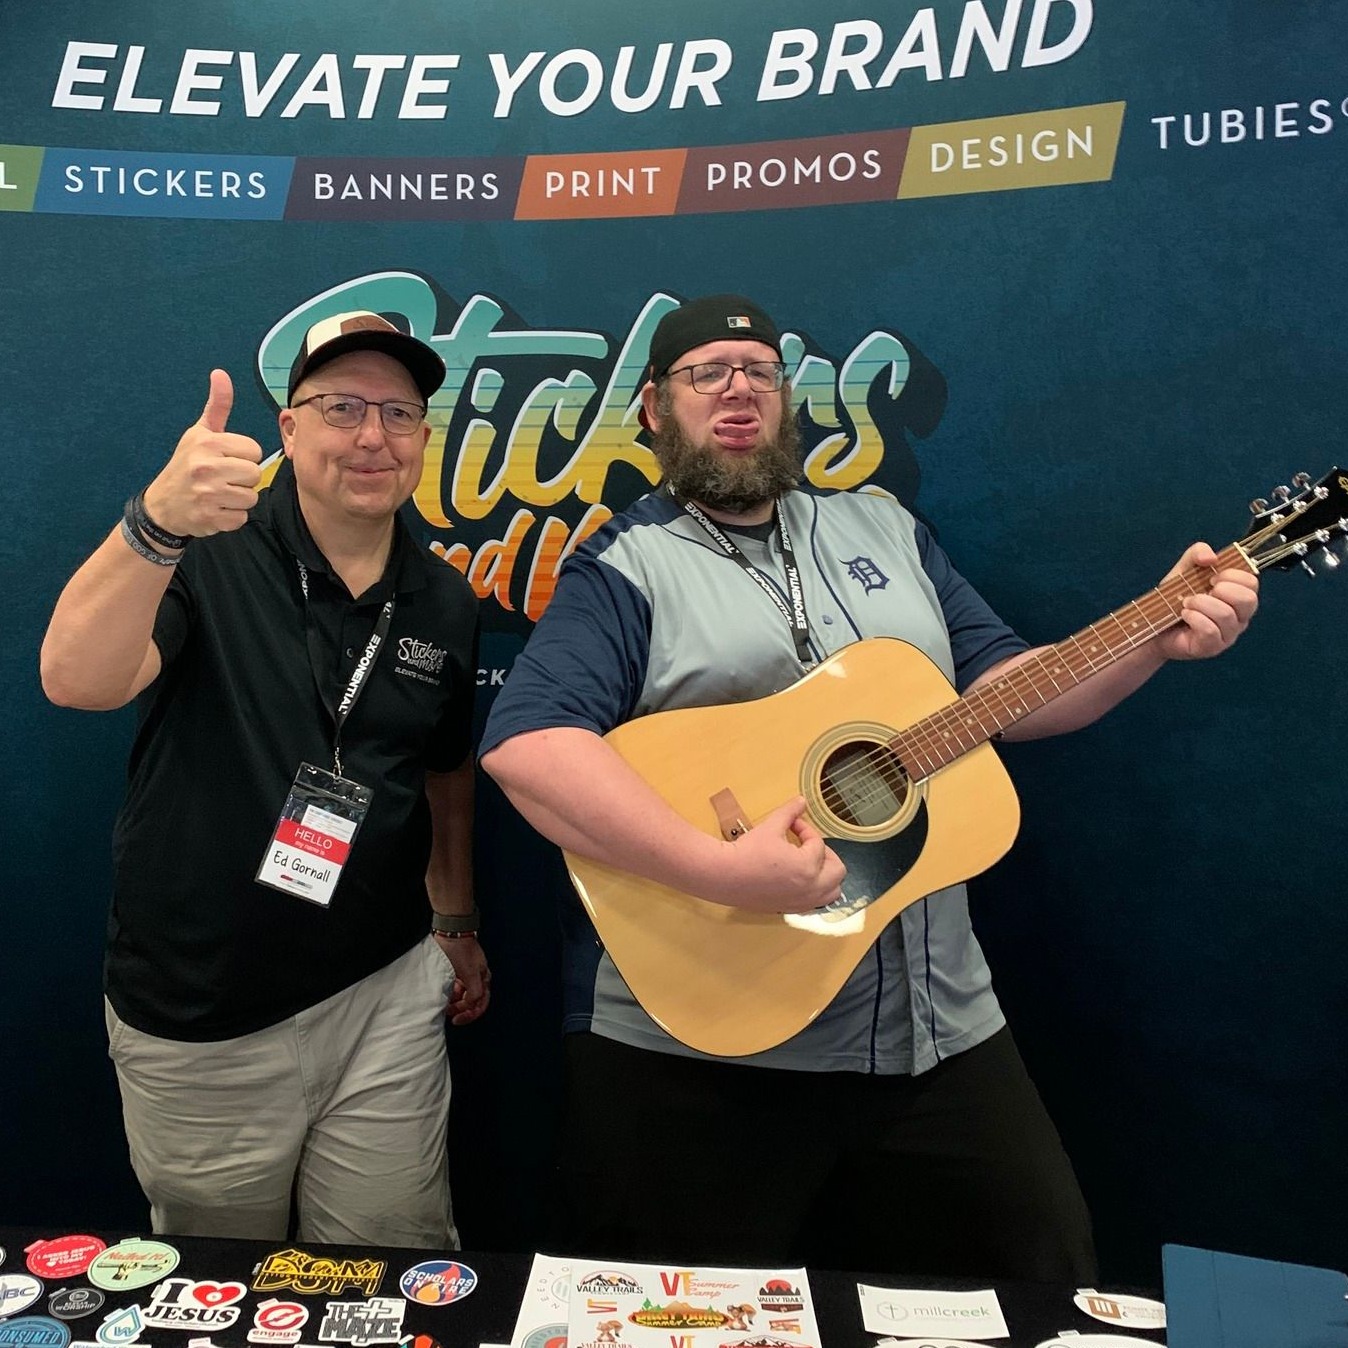 Congrats to Marcus form Manteno Church of The Nazarene on winning the guitar at the Exponential 2023 Conference. Always awesome to see people rocking out on their guitar. Looking to take your brand to the next level. Check out our website and see how we can help you elevate your brand.
https://stickersandmore.com/
#guitar #winnerswin #churchlife #happycustomers #Exponential2023